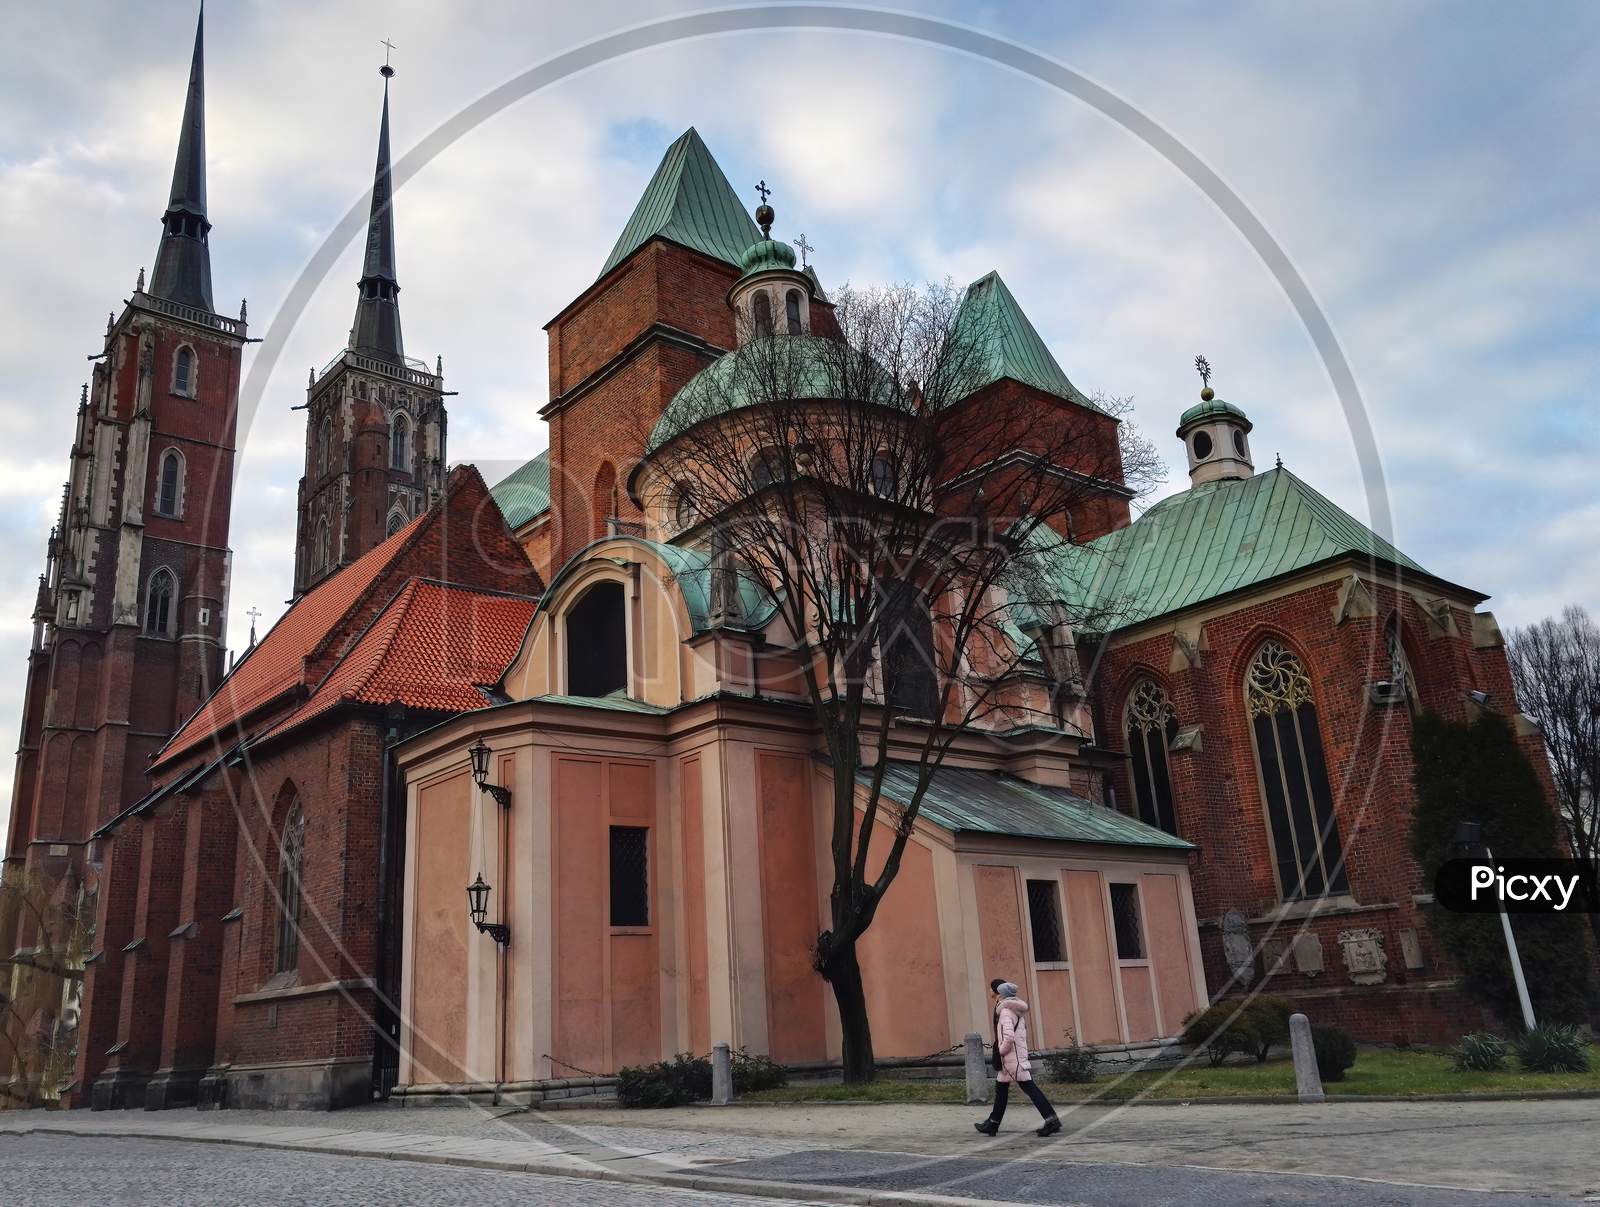 Wroclaw, Poland - December 29, 2017: Wide Angle Shot Of People Walking Against Famous Landmark Cathedral Of St. John The Baptist Church.